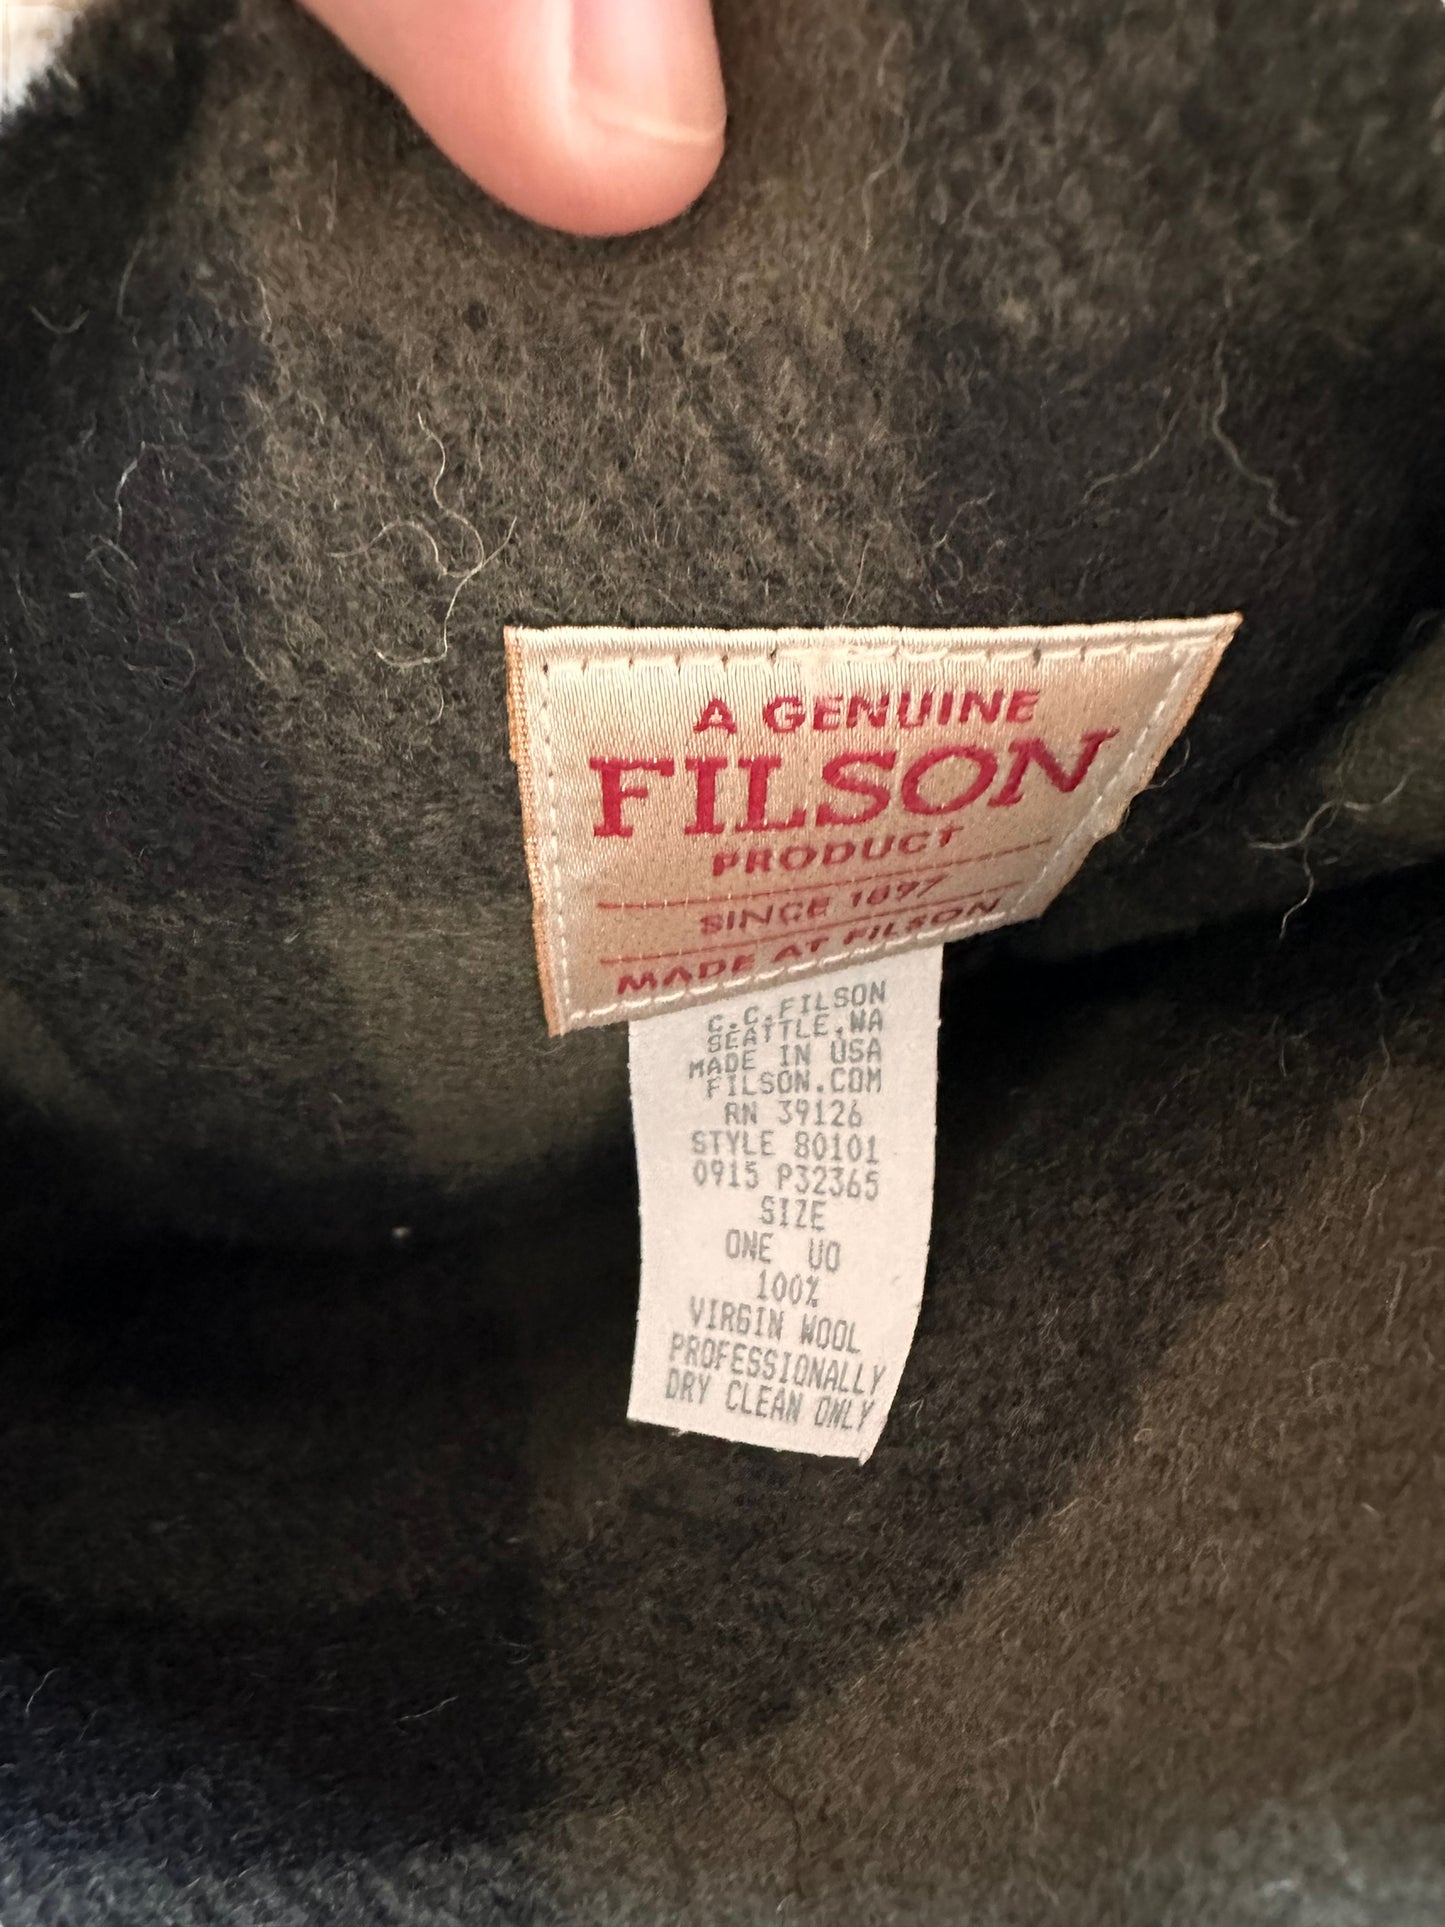 Production Tag View of Filson Forest Green Plaid Mackinaw Wool Christmas Stocking |  Barn Owl Vintage Goods | Vintage Filson Workwear Seattle